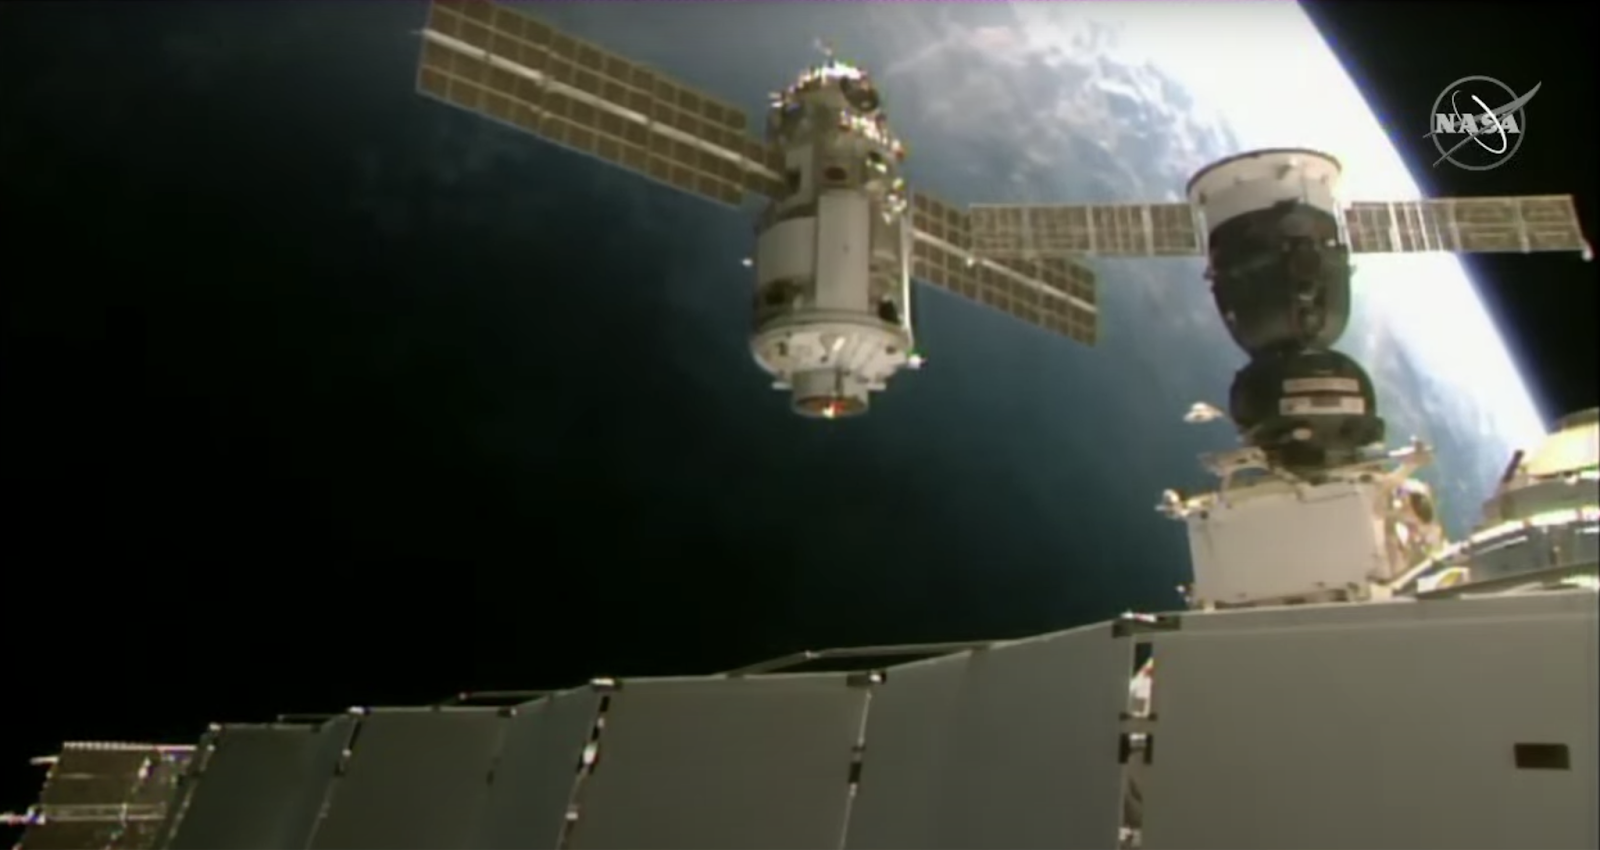 Nauka module - the one with the coolant leak - originally docking at the ISS 